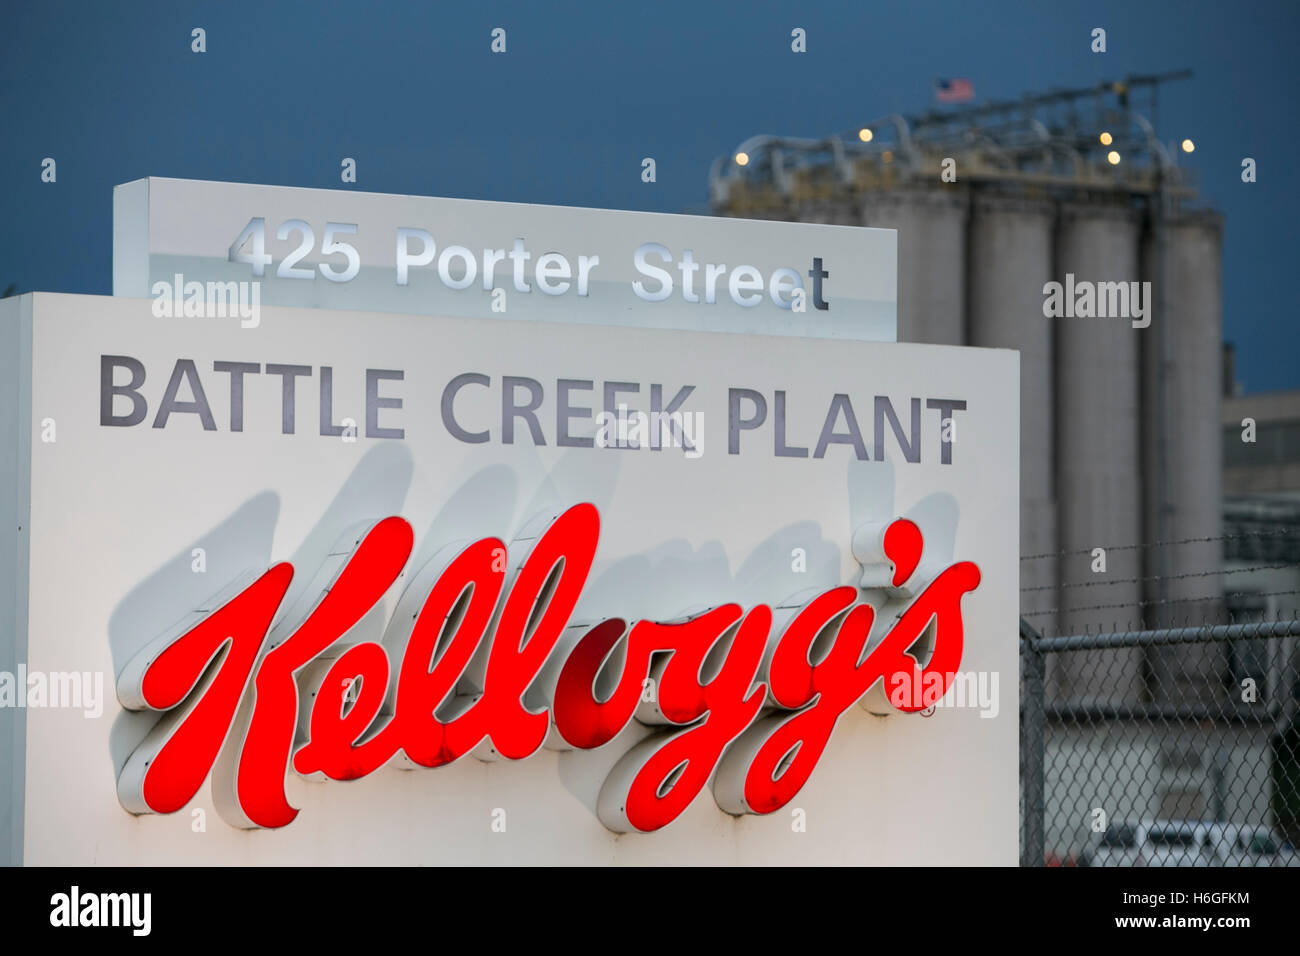 A logo sign outside of the Kellogg's Battle Creek Plant in Battle Creek, Michigan on October 16, 2016. Stock Photo